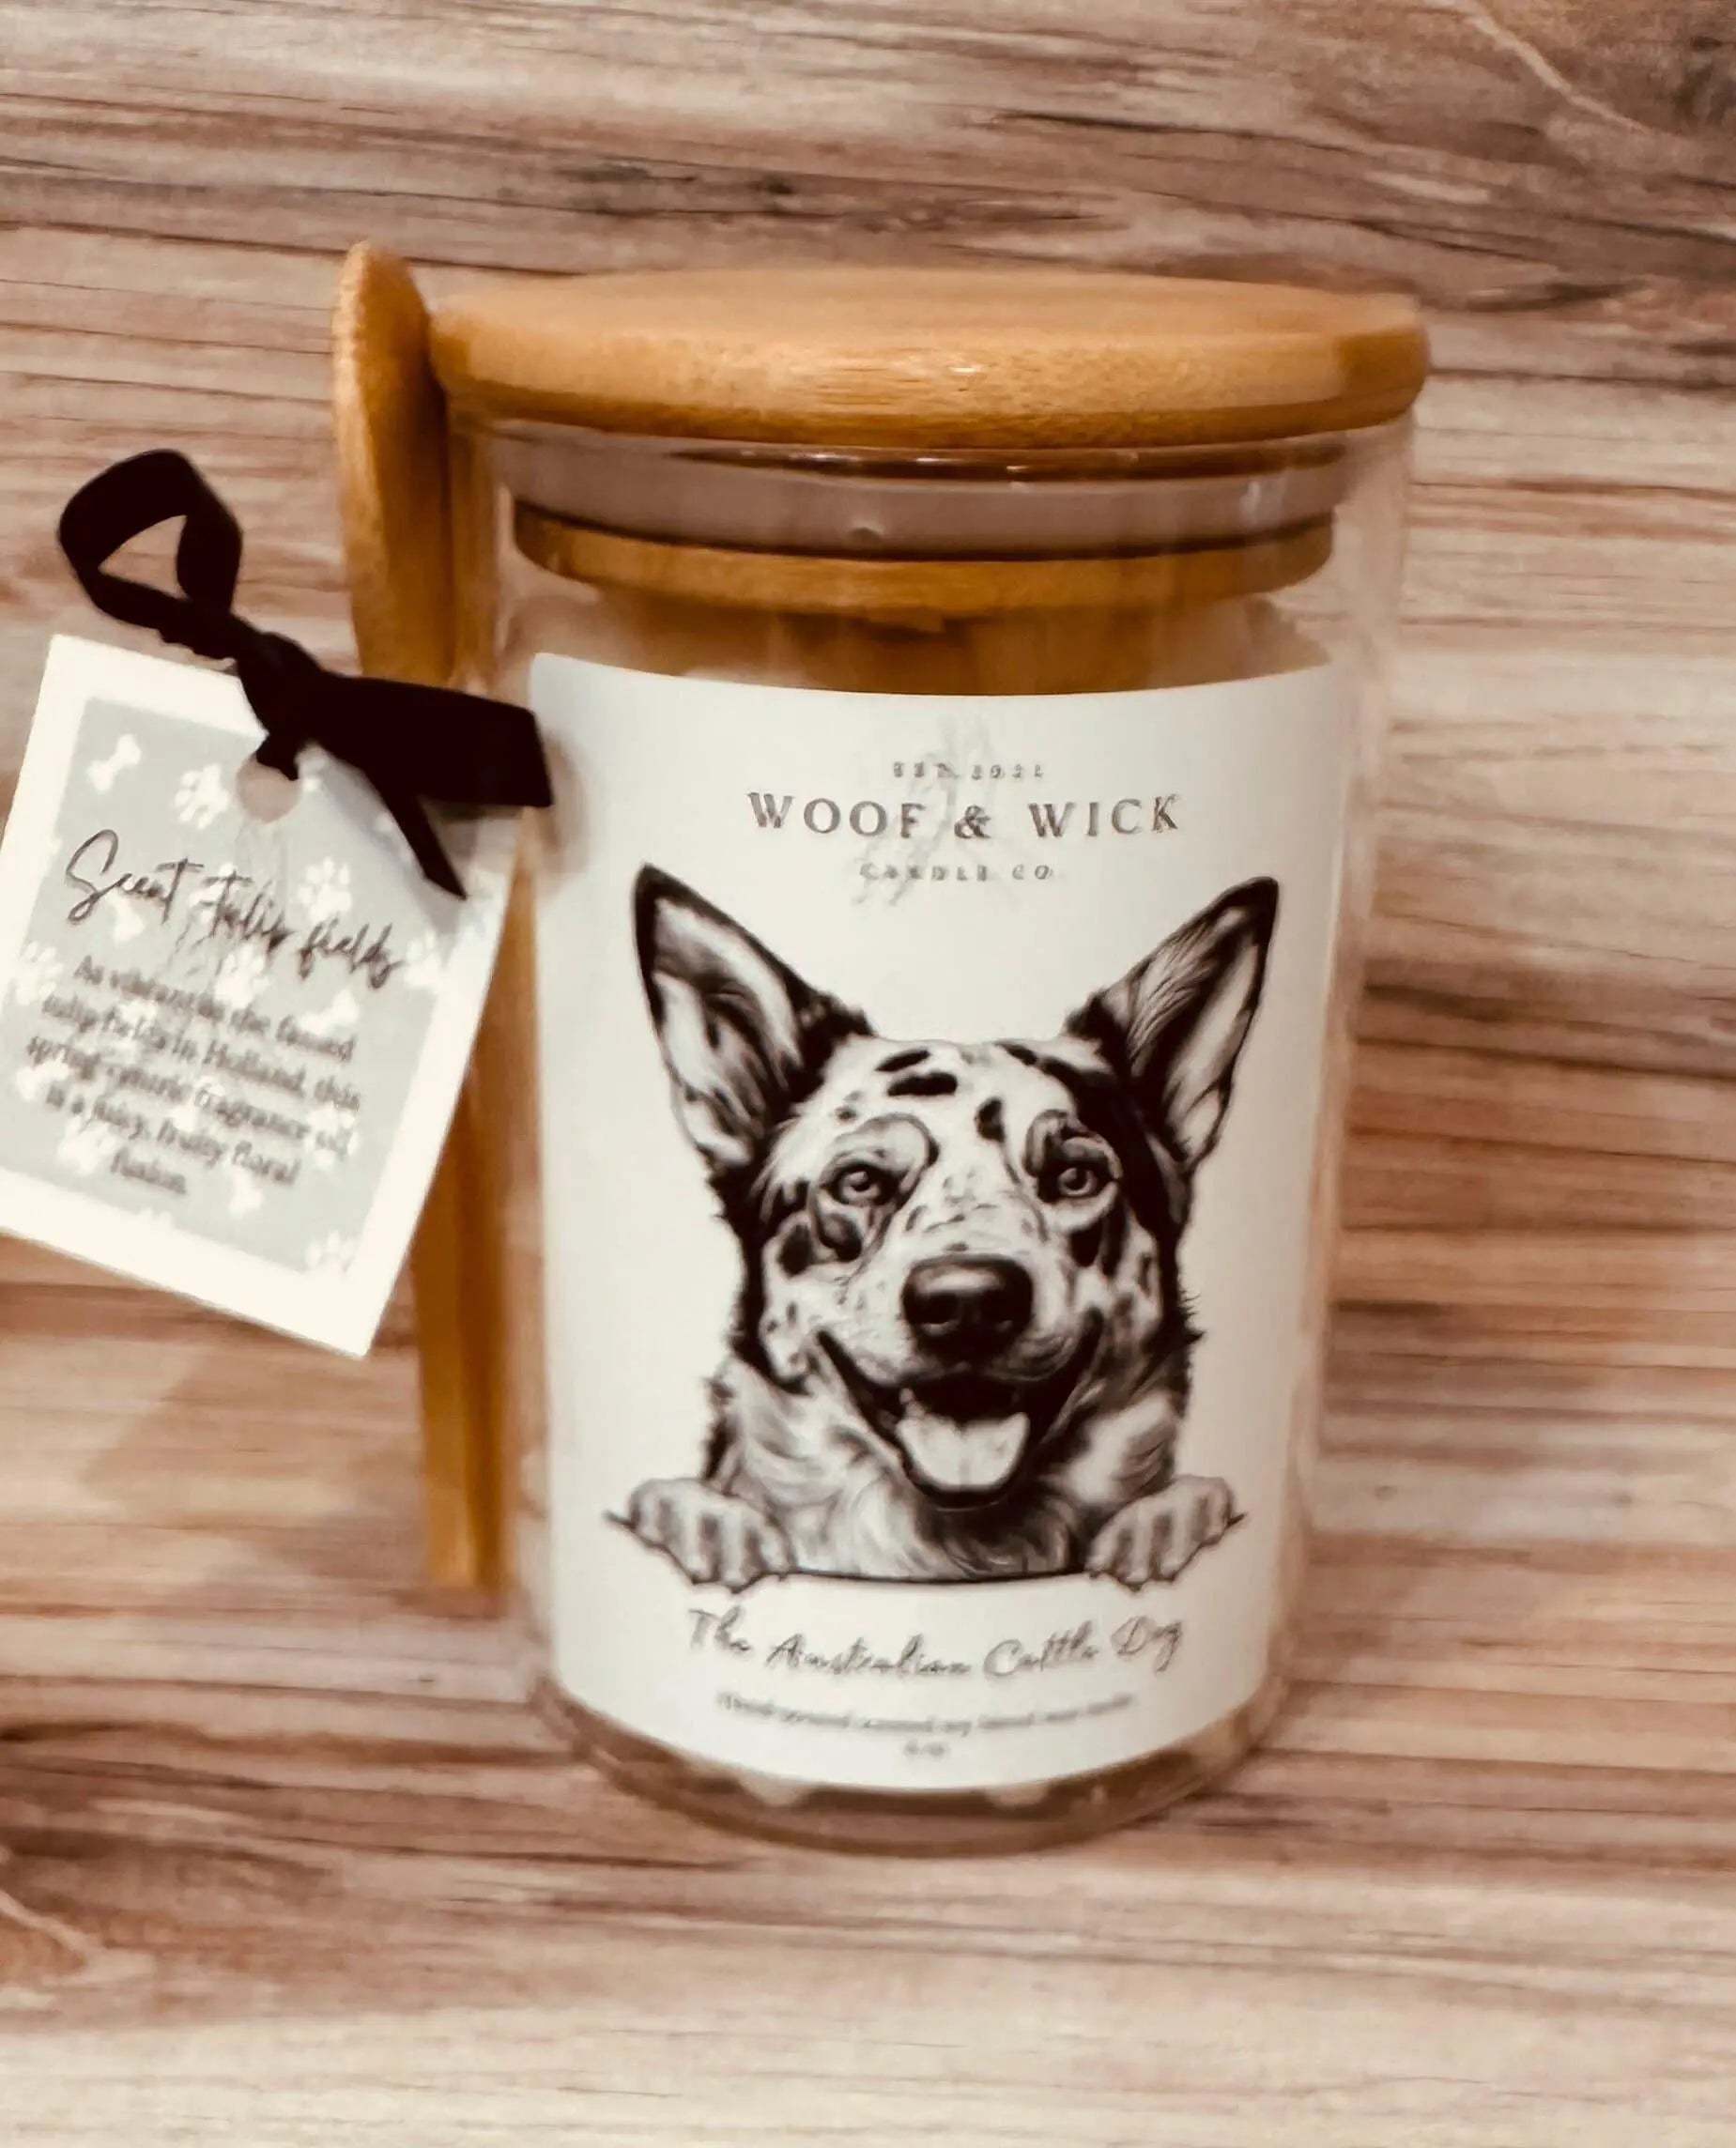 The Australian Cattle Dog - STRONG SCENTED Personalized Dog Breed Soy Wax Melts | Gift Ideas | Spring Scents | Wax Tarts | spring | - Woof & Wick Candle Co.